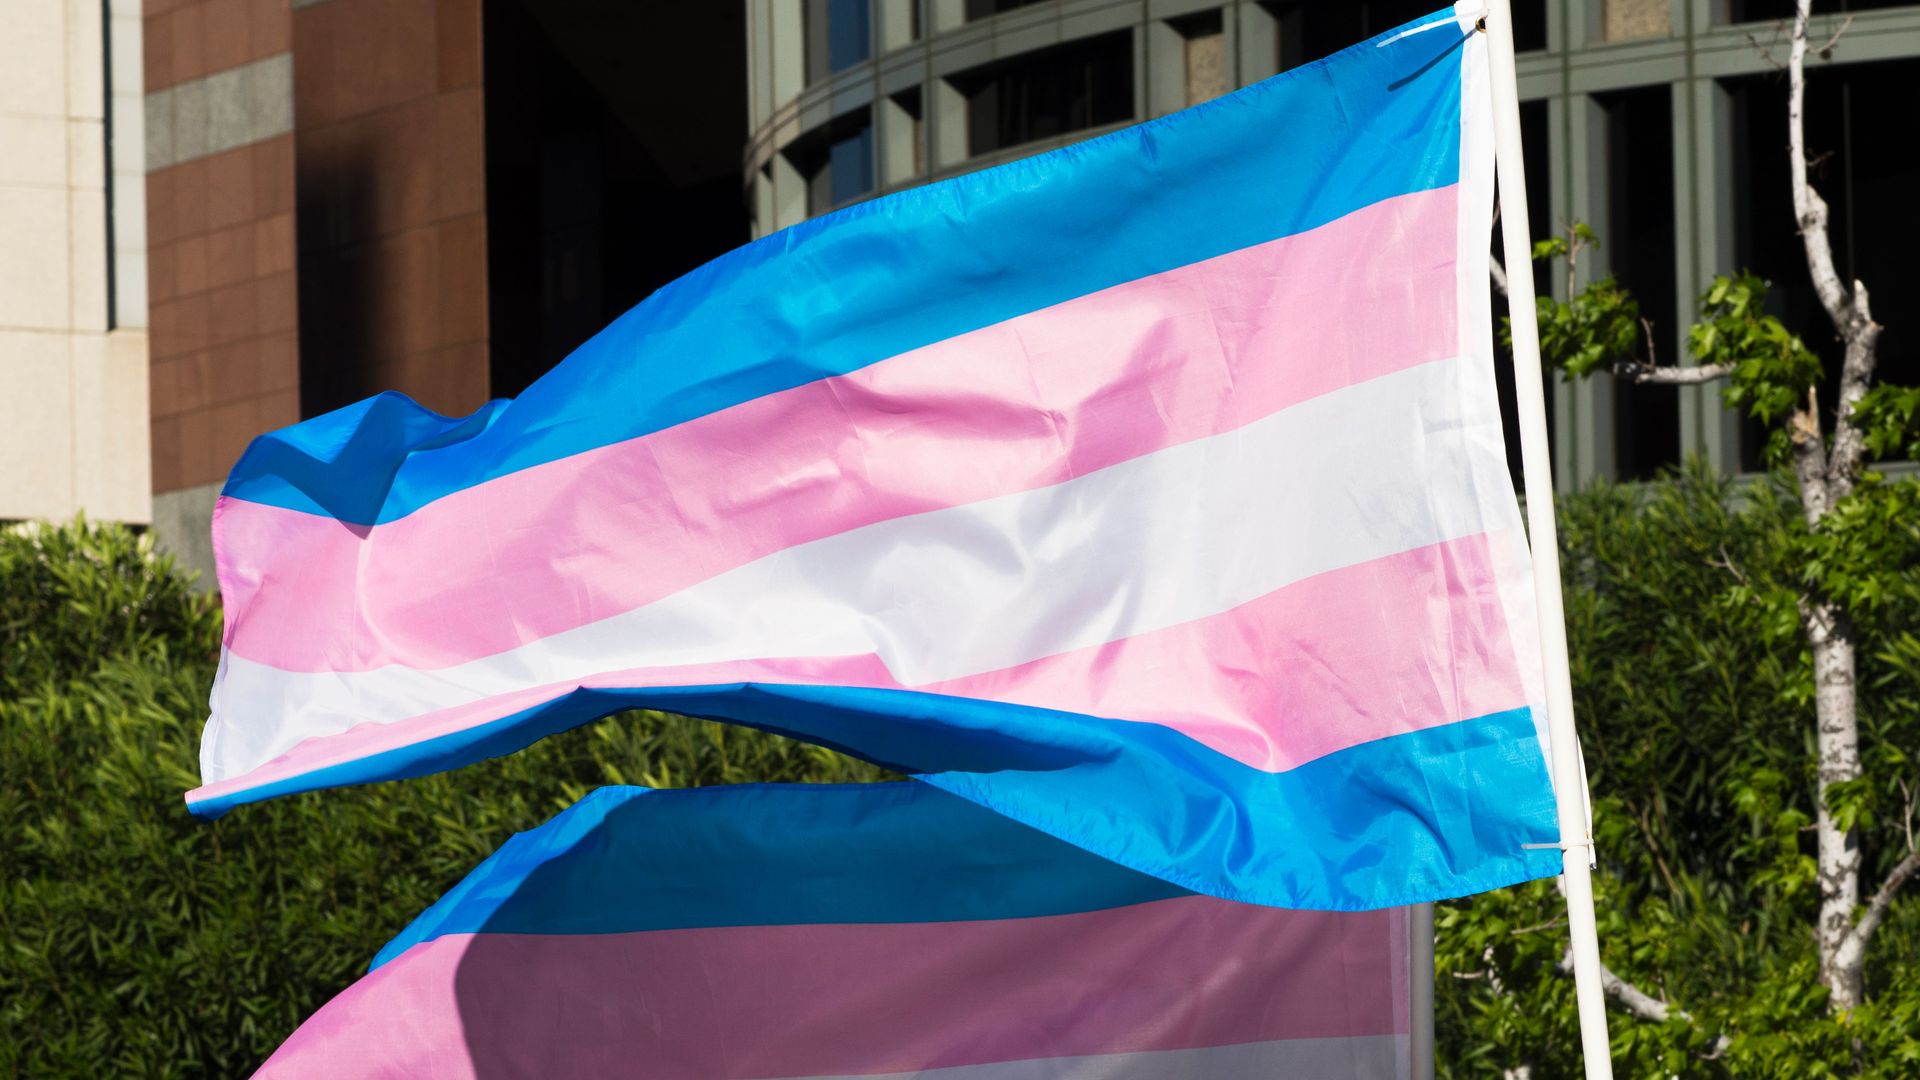 Two trans flags wave in this picture.